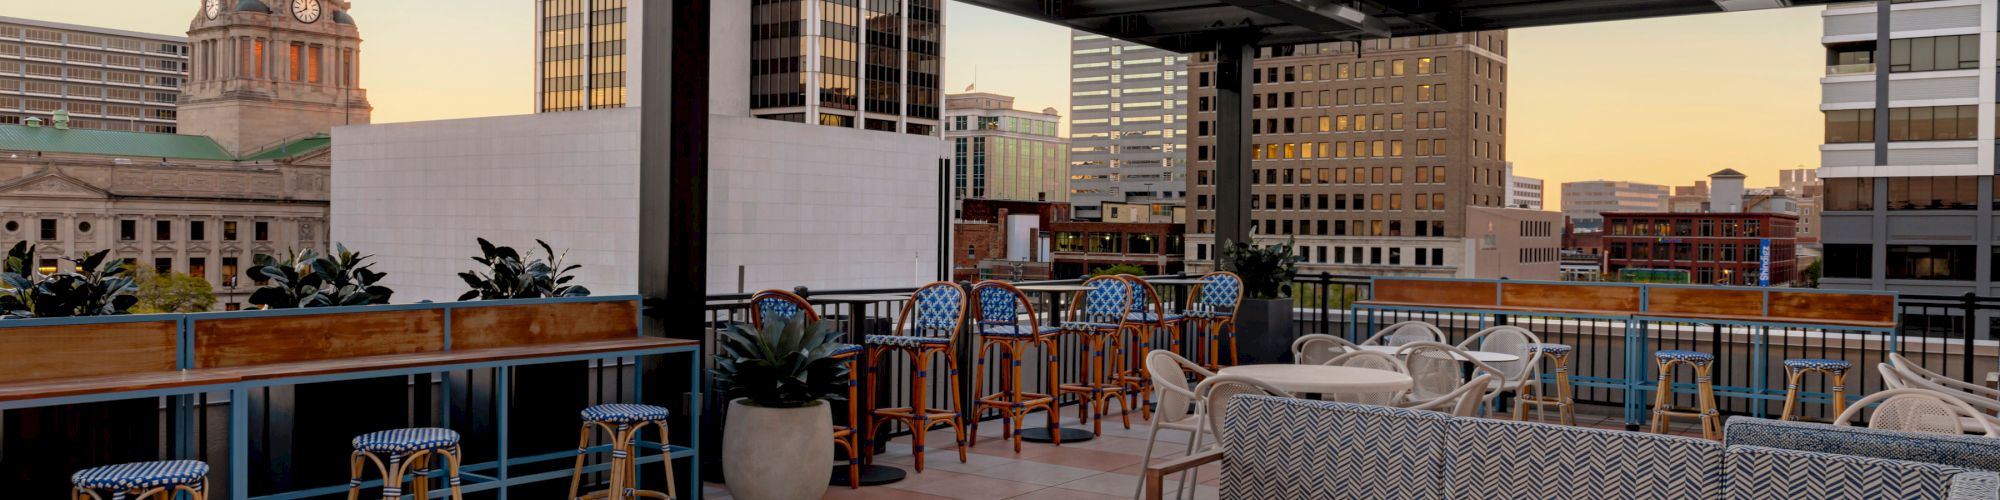 A rooftop patio with a fire pit, cushioned seating, bar stools, and city skyline views, including a domed building in the background.